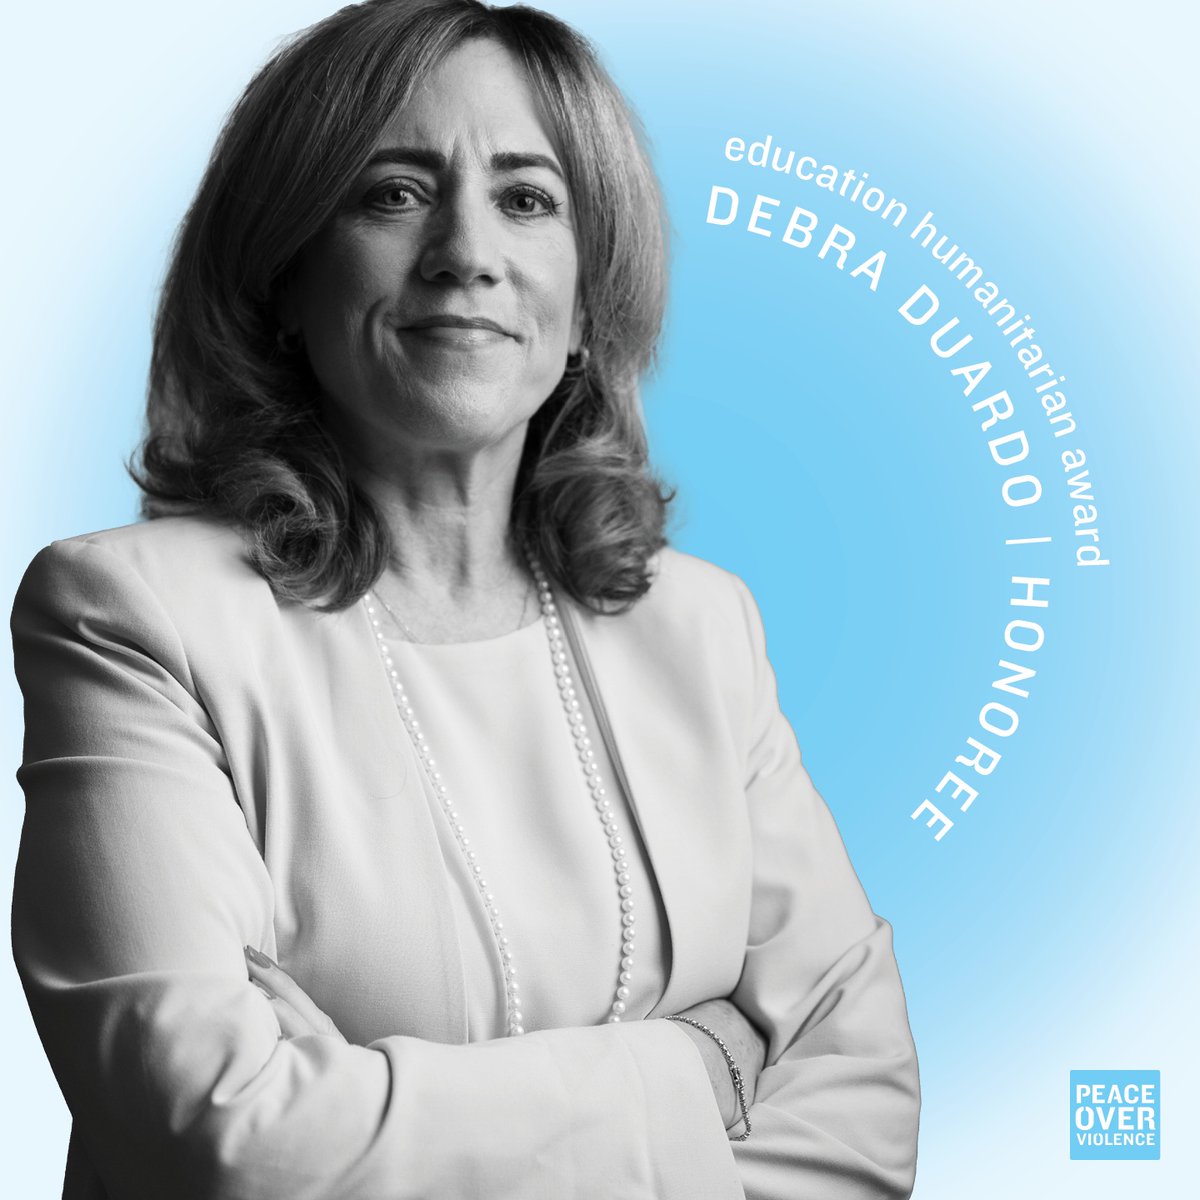 Meet our '23 Education Humanitarian Award Honoree: @DebraDuardo, M.S.W., Ed.D.,@LosAngelesCOE. Dr. Duardo prioritizes access to education, for many marginalized & underserved communities. A longtime friend & former staff member, we're thrilled to honor her at this year’s EOV.